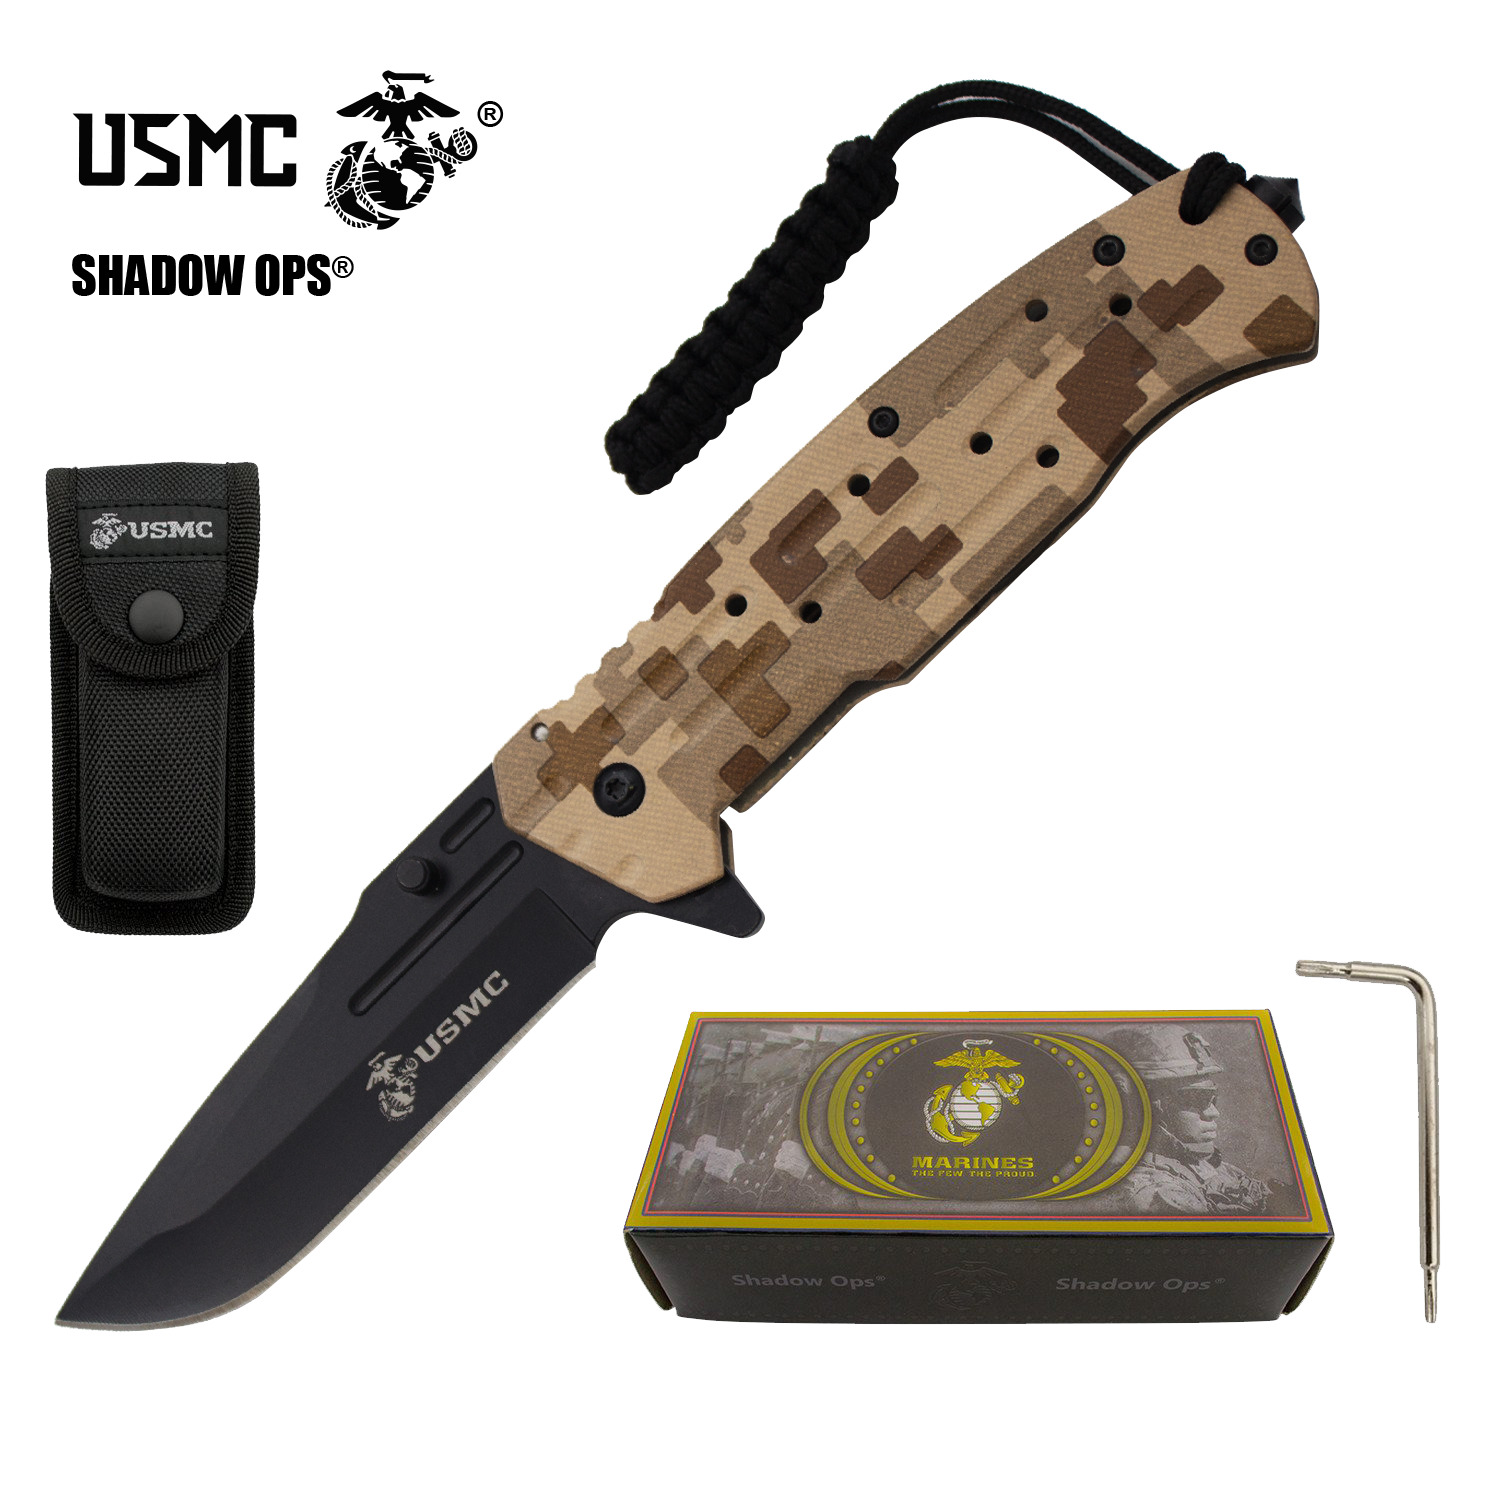 USMC MARINES Knife Assisted Opening Officially Licensed with Case and Tool